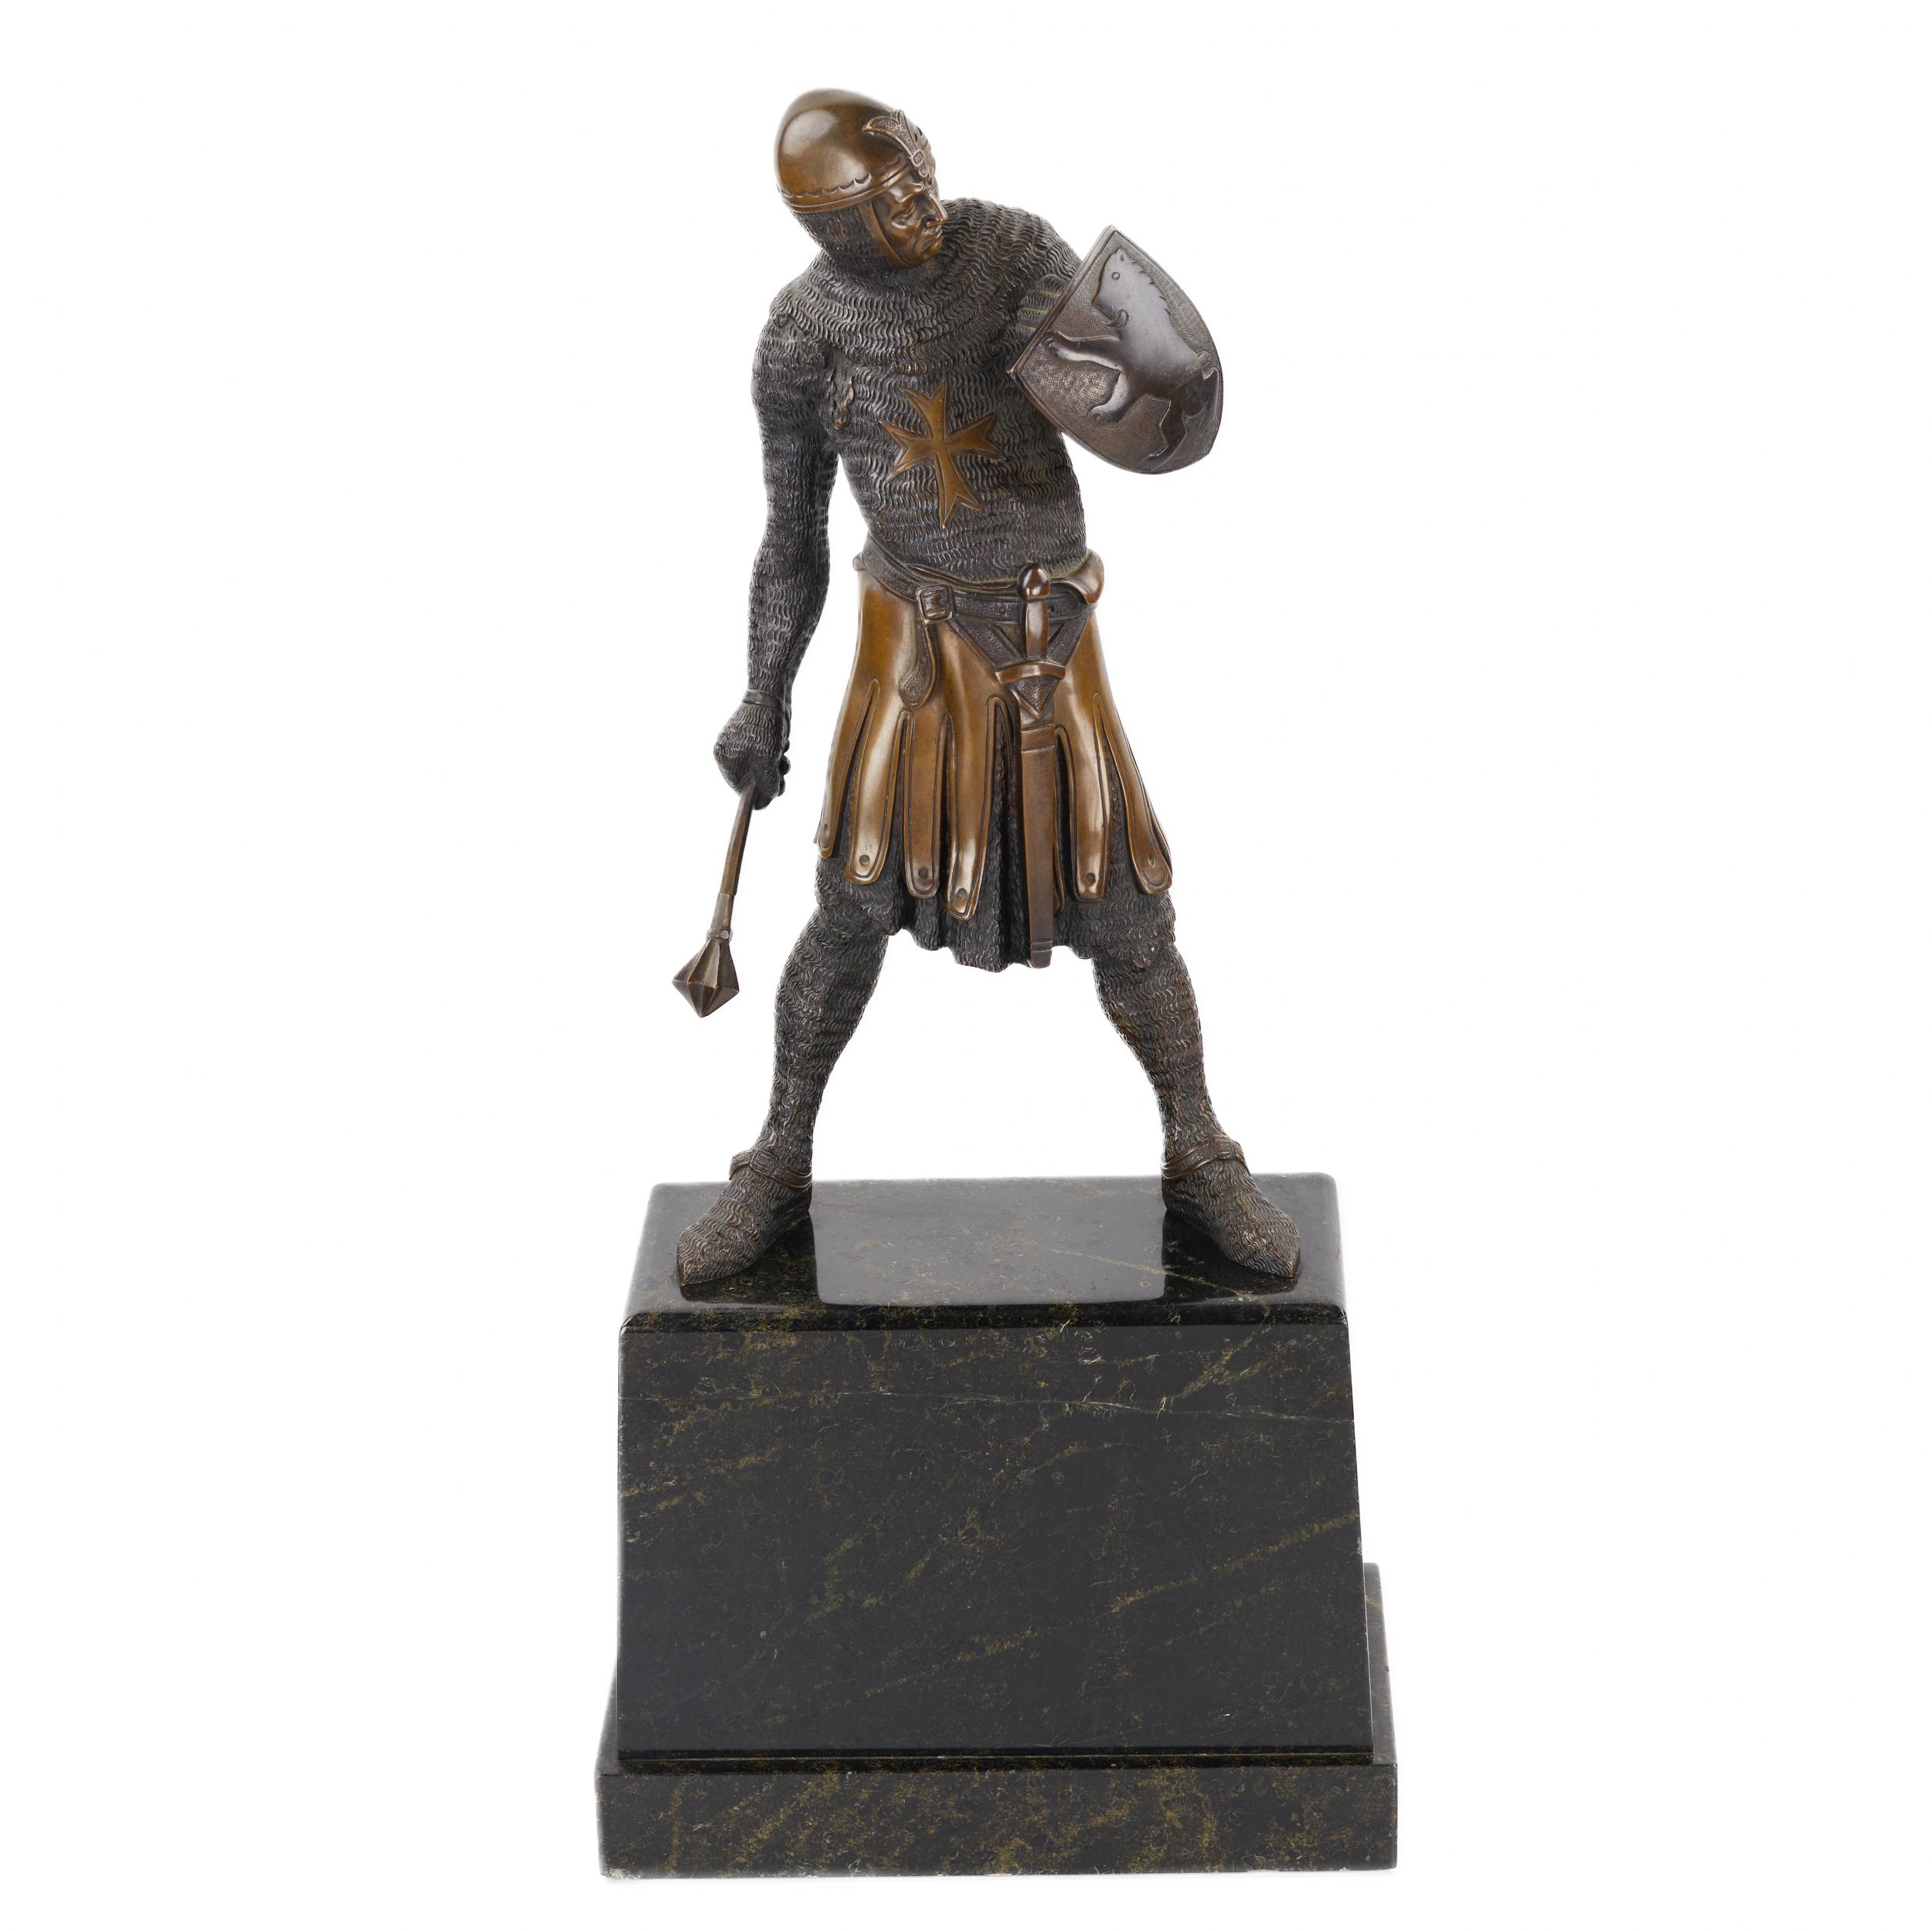 Bronze-sculpture-of-the-Knight-of-Malta-Turn-of-the-19th-and-20th-centuries-